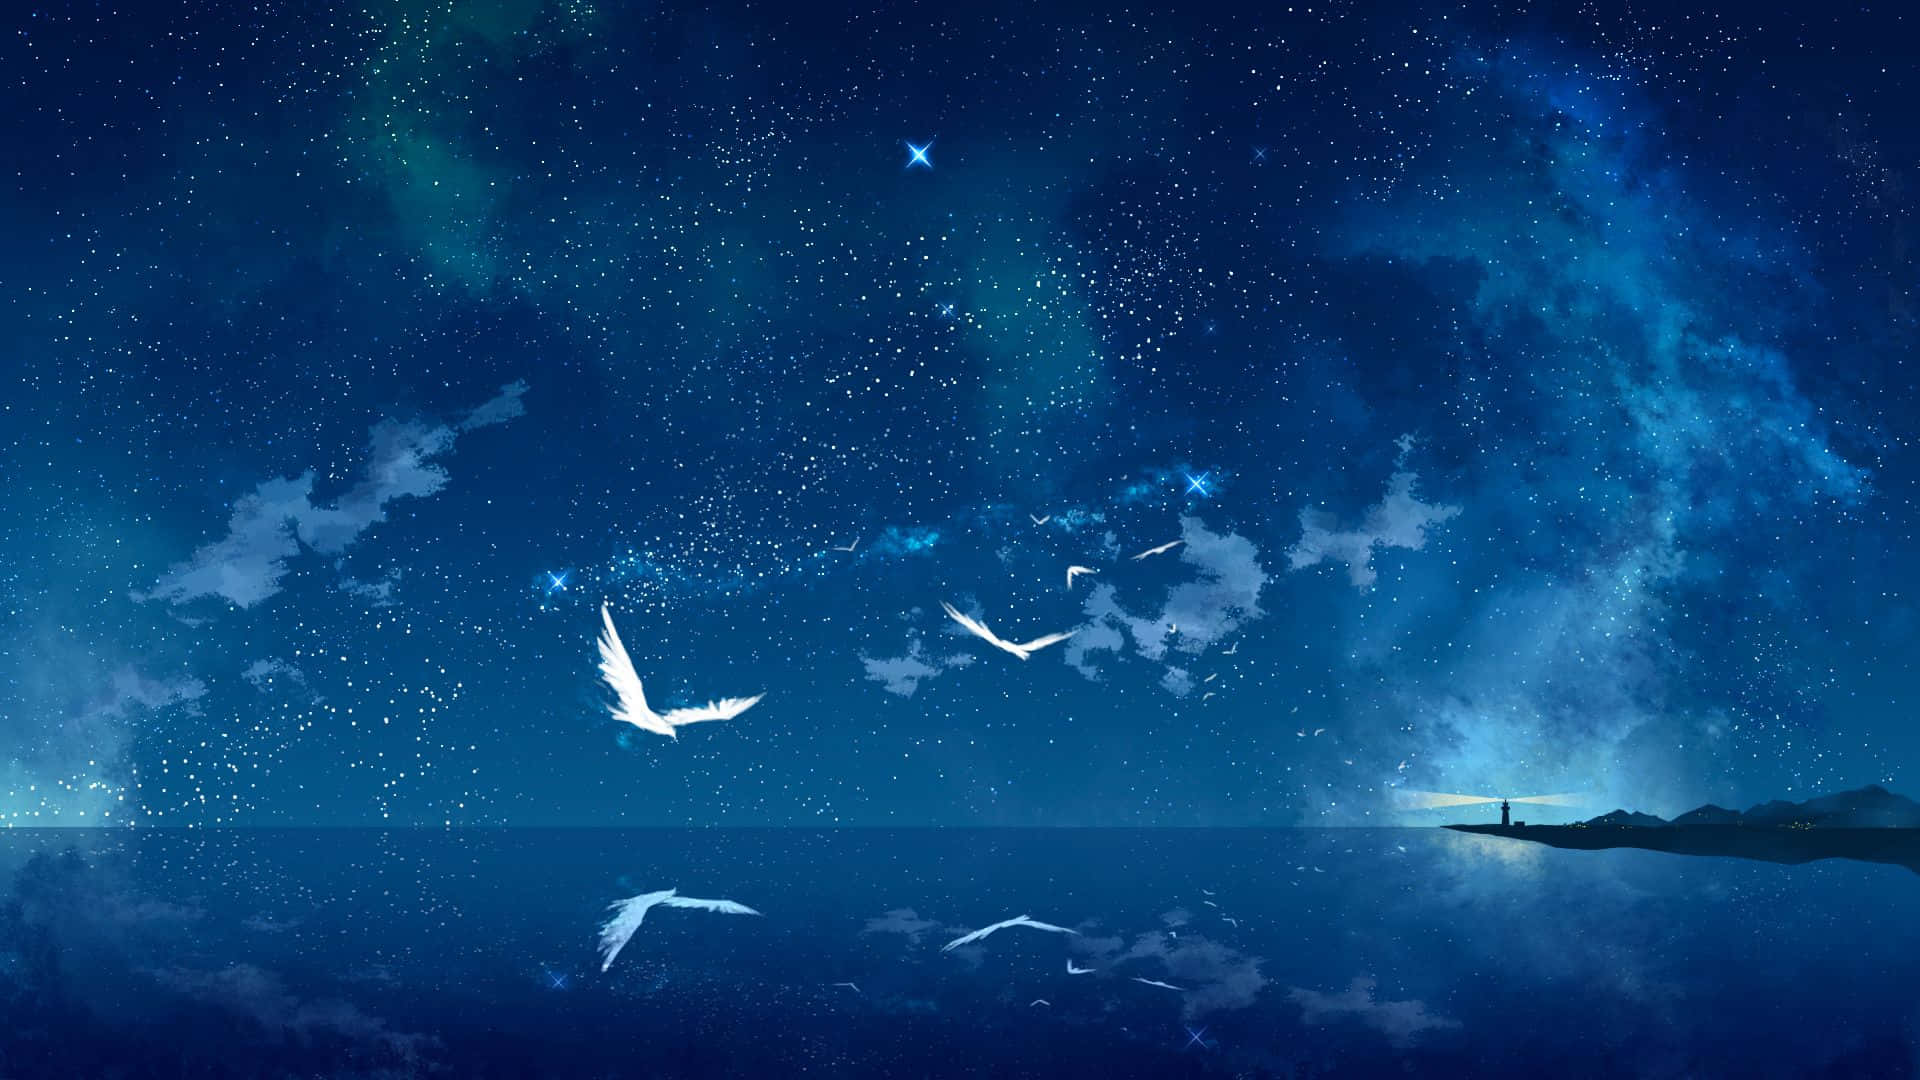 Magical Night Sky With Seagulls Flying Over Blue Sea